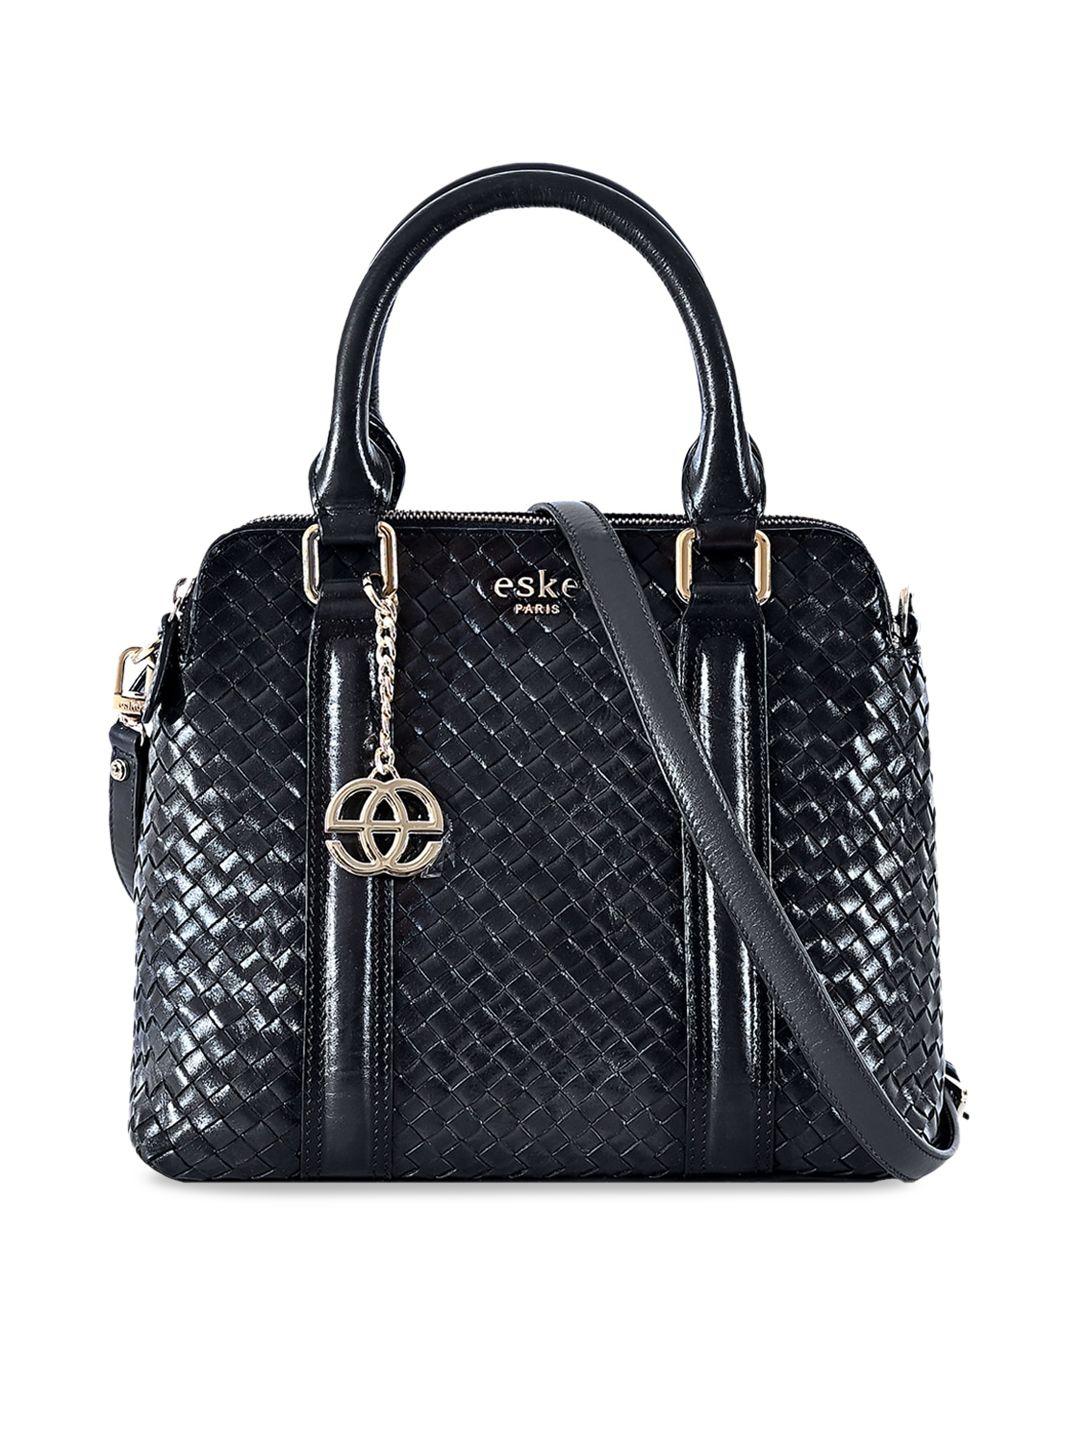 eske navy blue geometric textured leather structured satchel with quilted